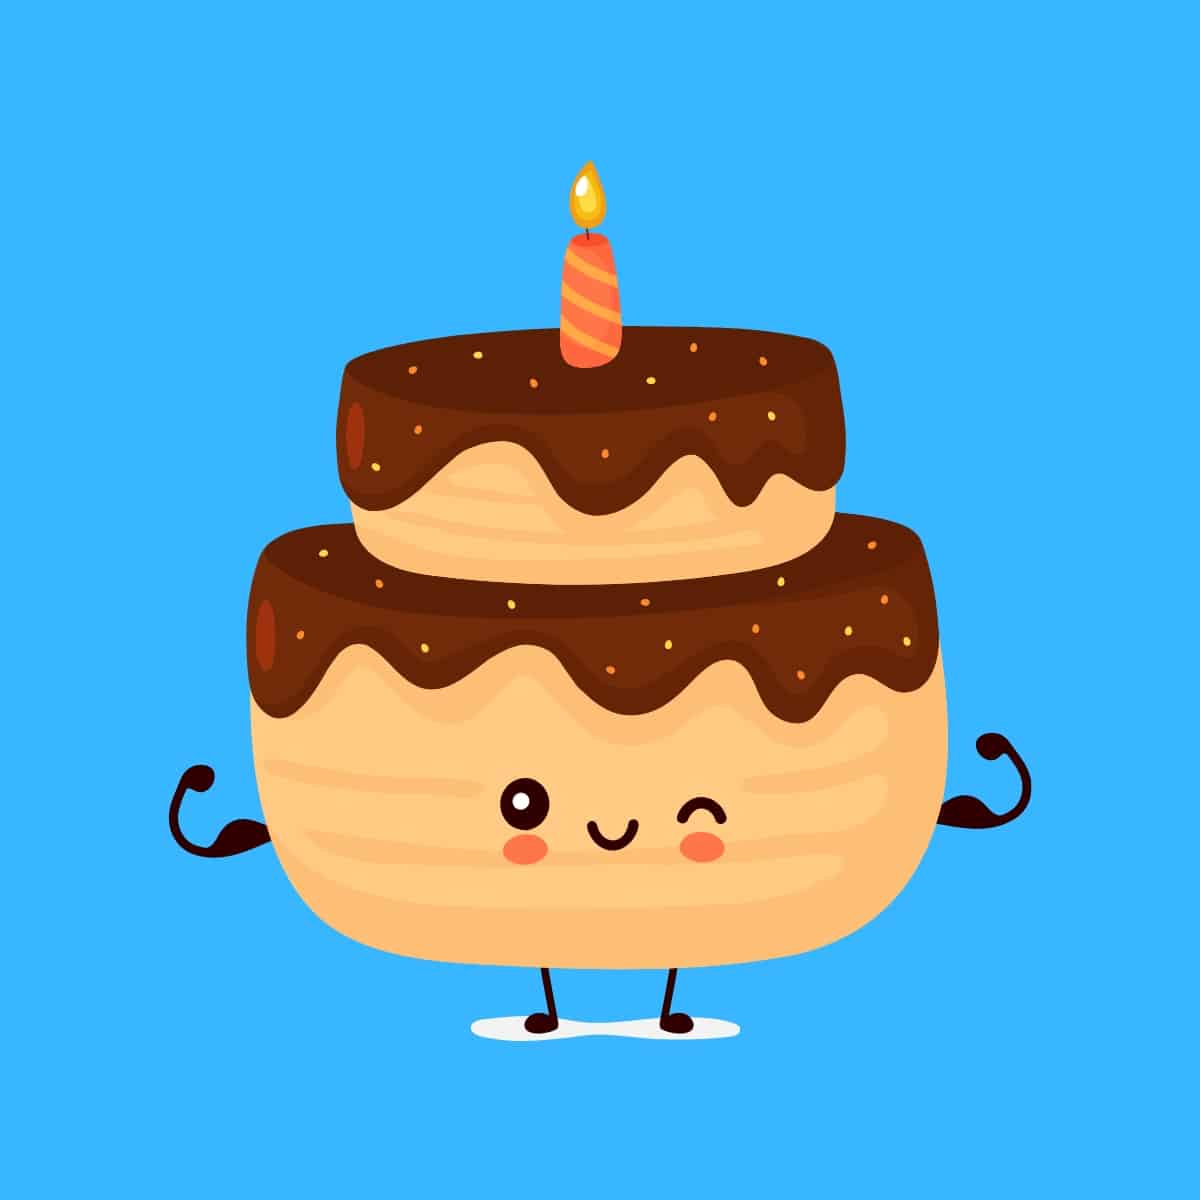 Cartoon graphic of a two-tier birthday cake winking and showing its muscles on a blue background.